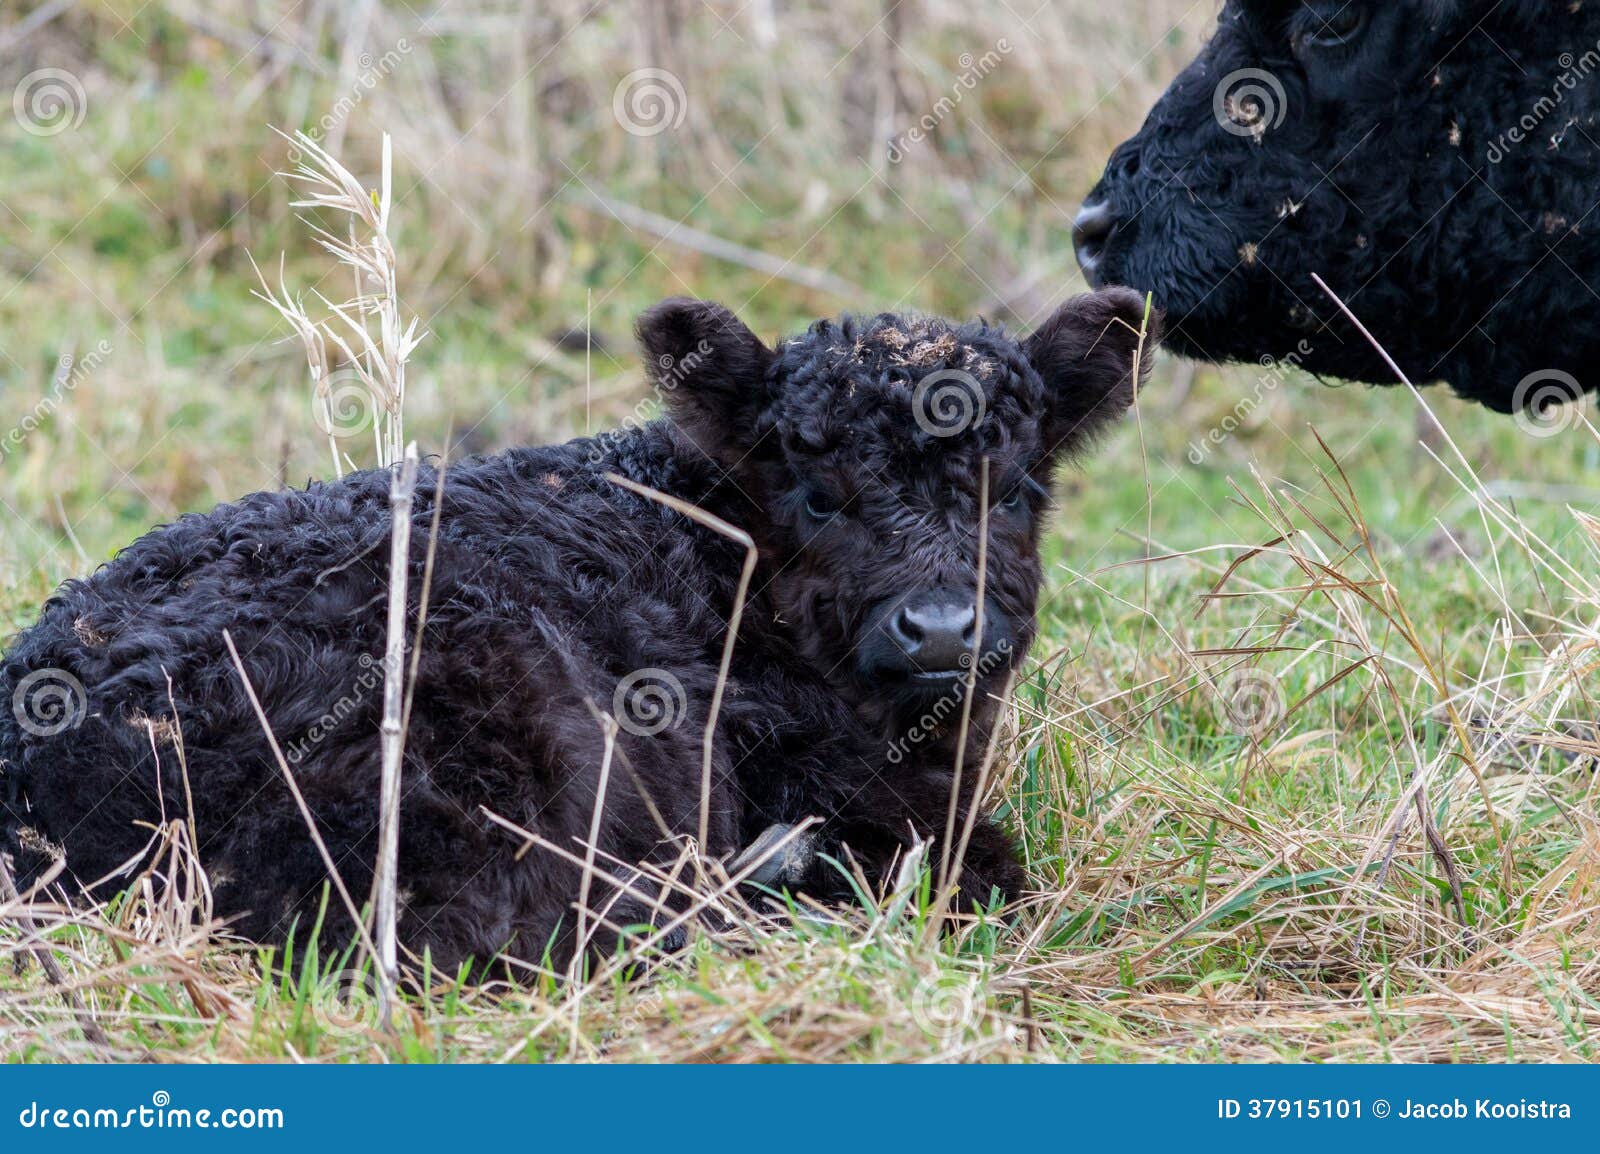 wild black bovine calf lying on the grass with caring mother